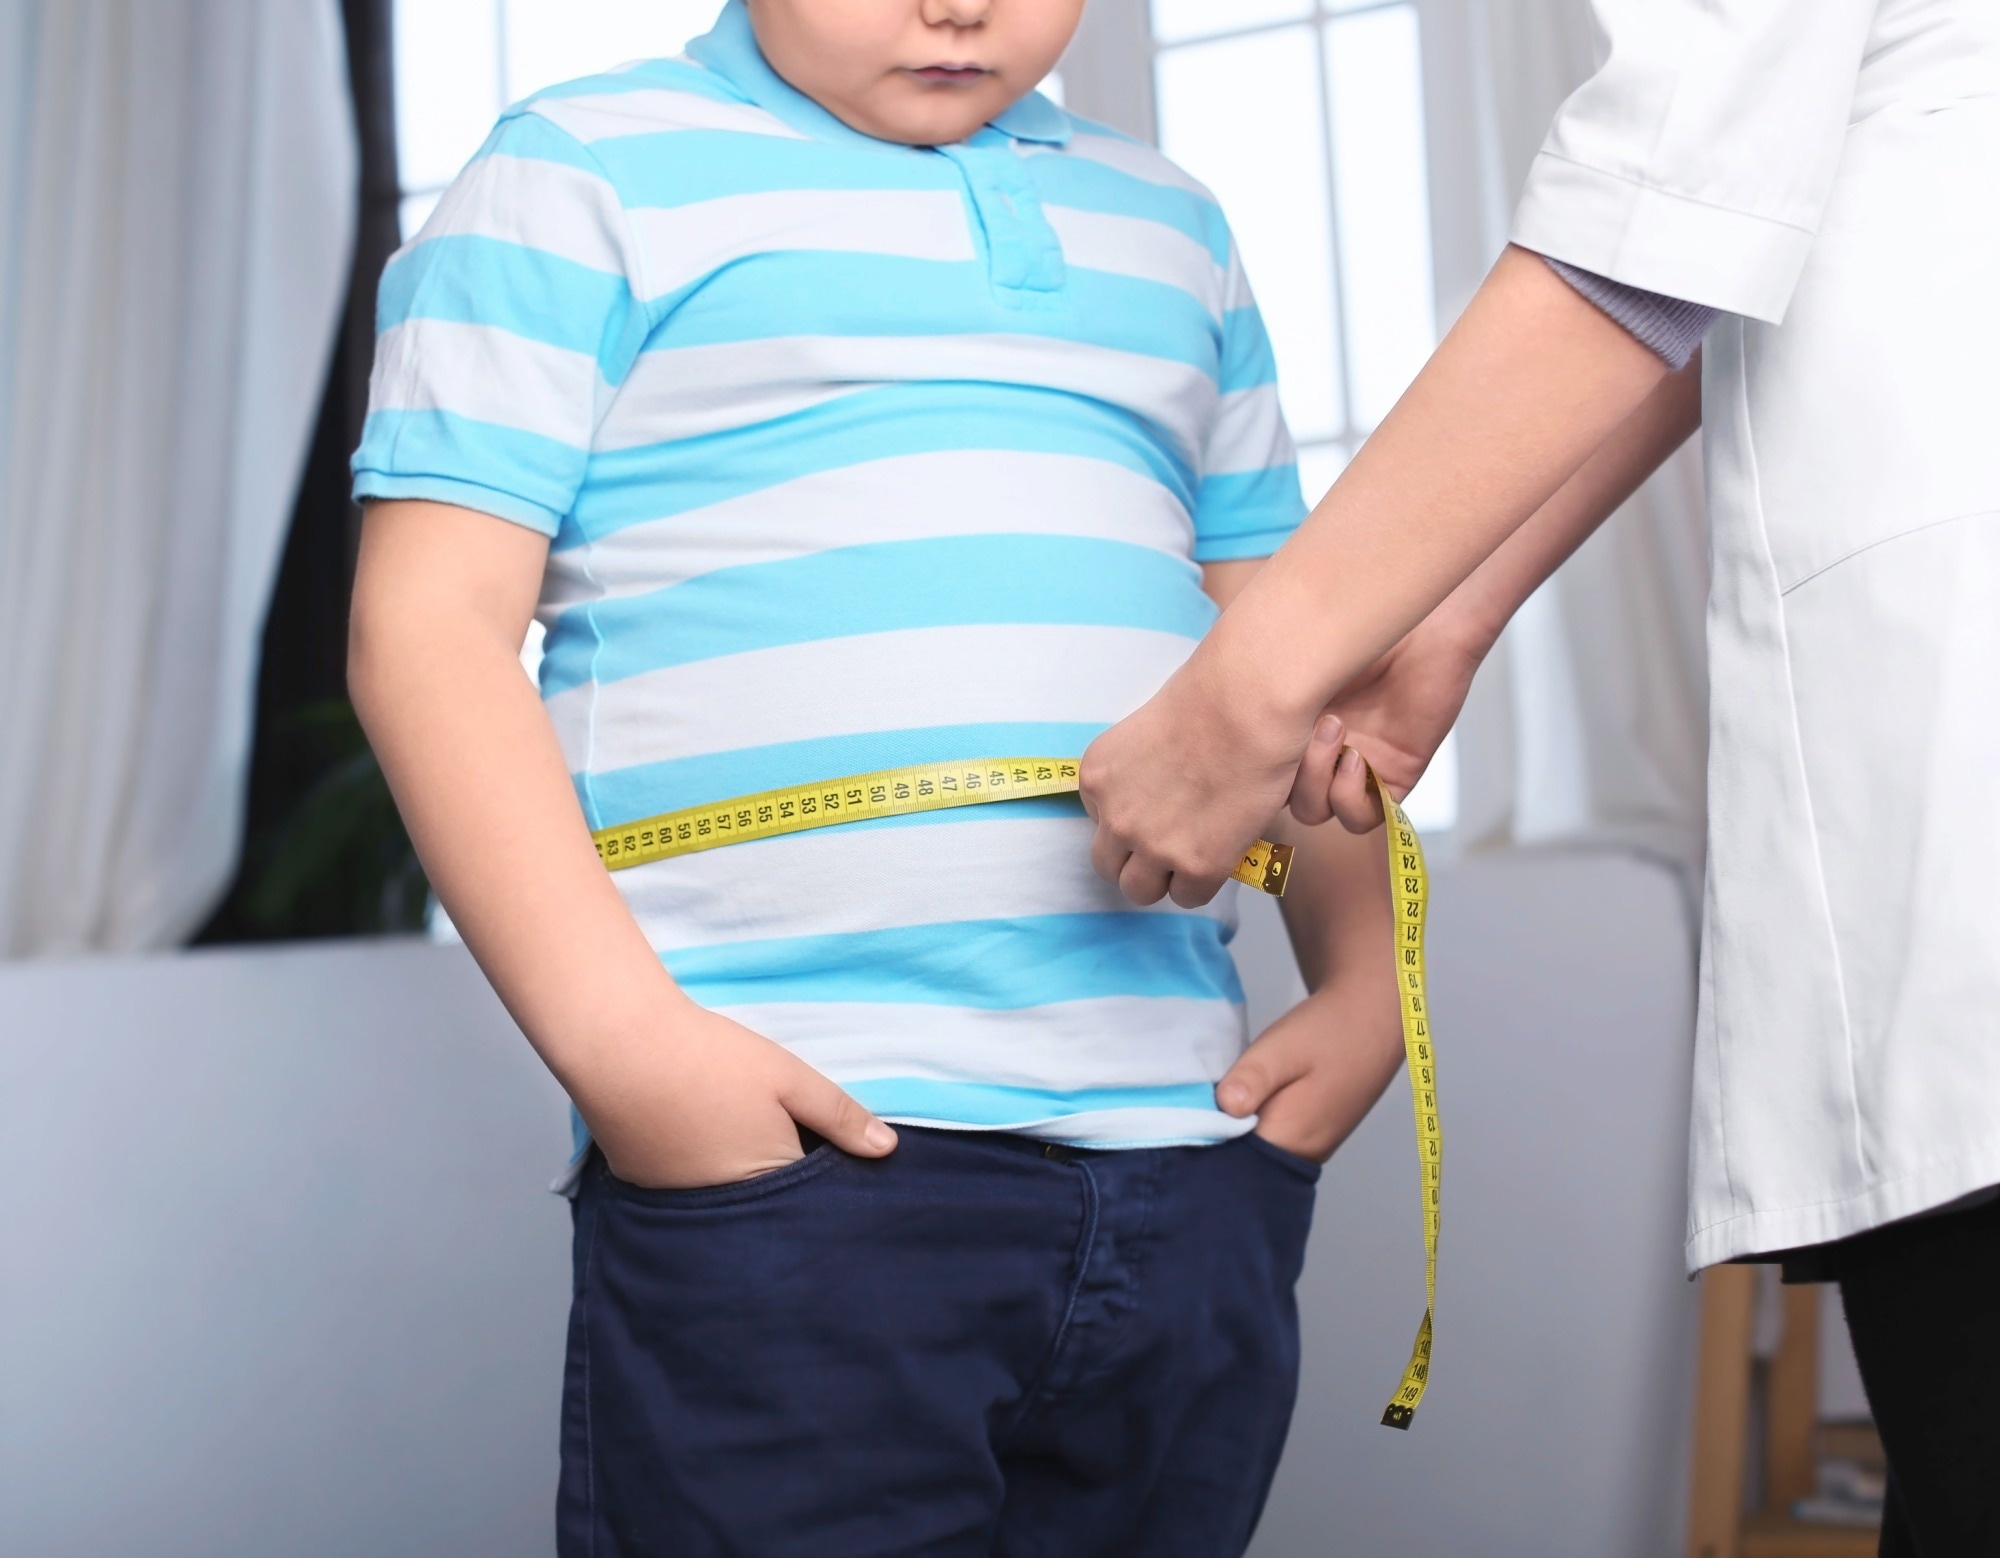 American Academy of Pediatrics releases the first clinical practice guideline for evaluating and treating childhood obesity